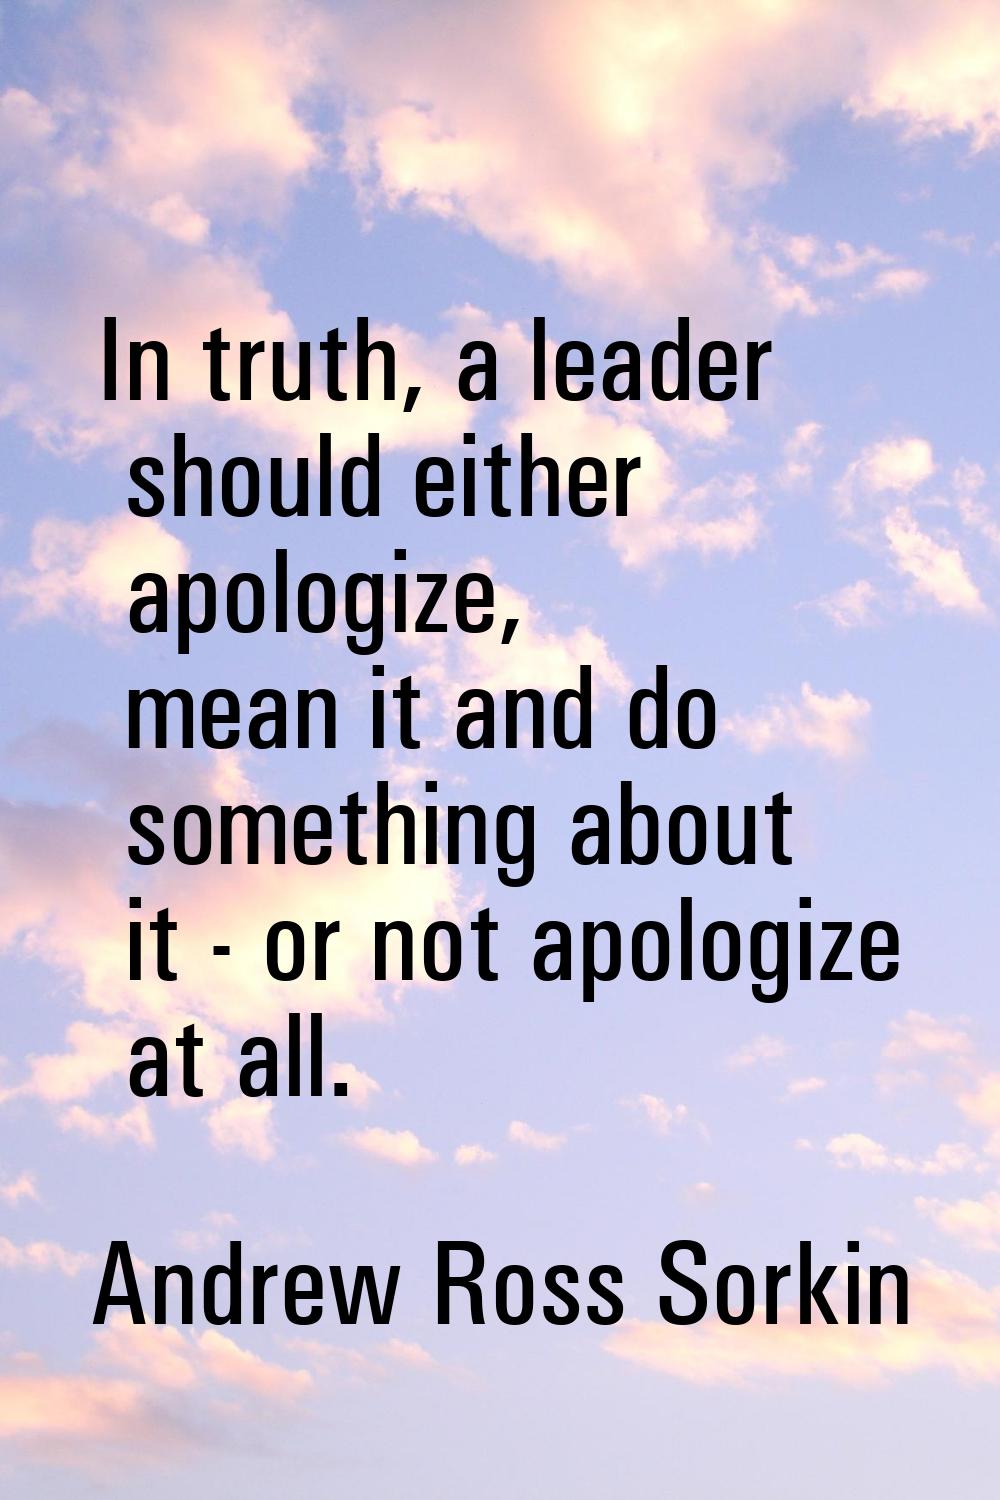 In truth, a leader should either apologize, mean it and do something about it - or not apologize at